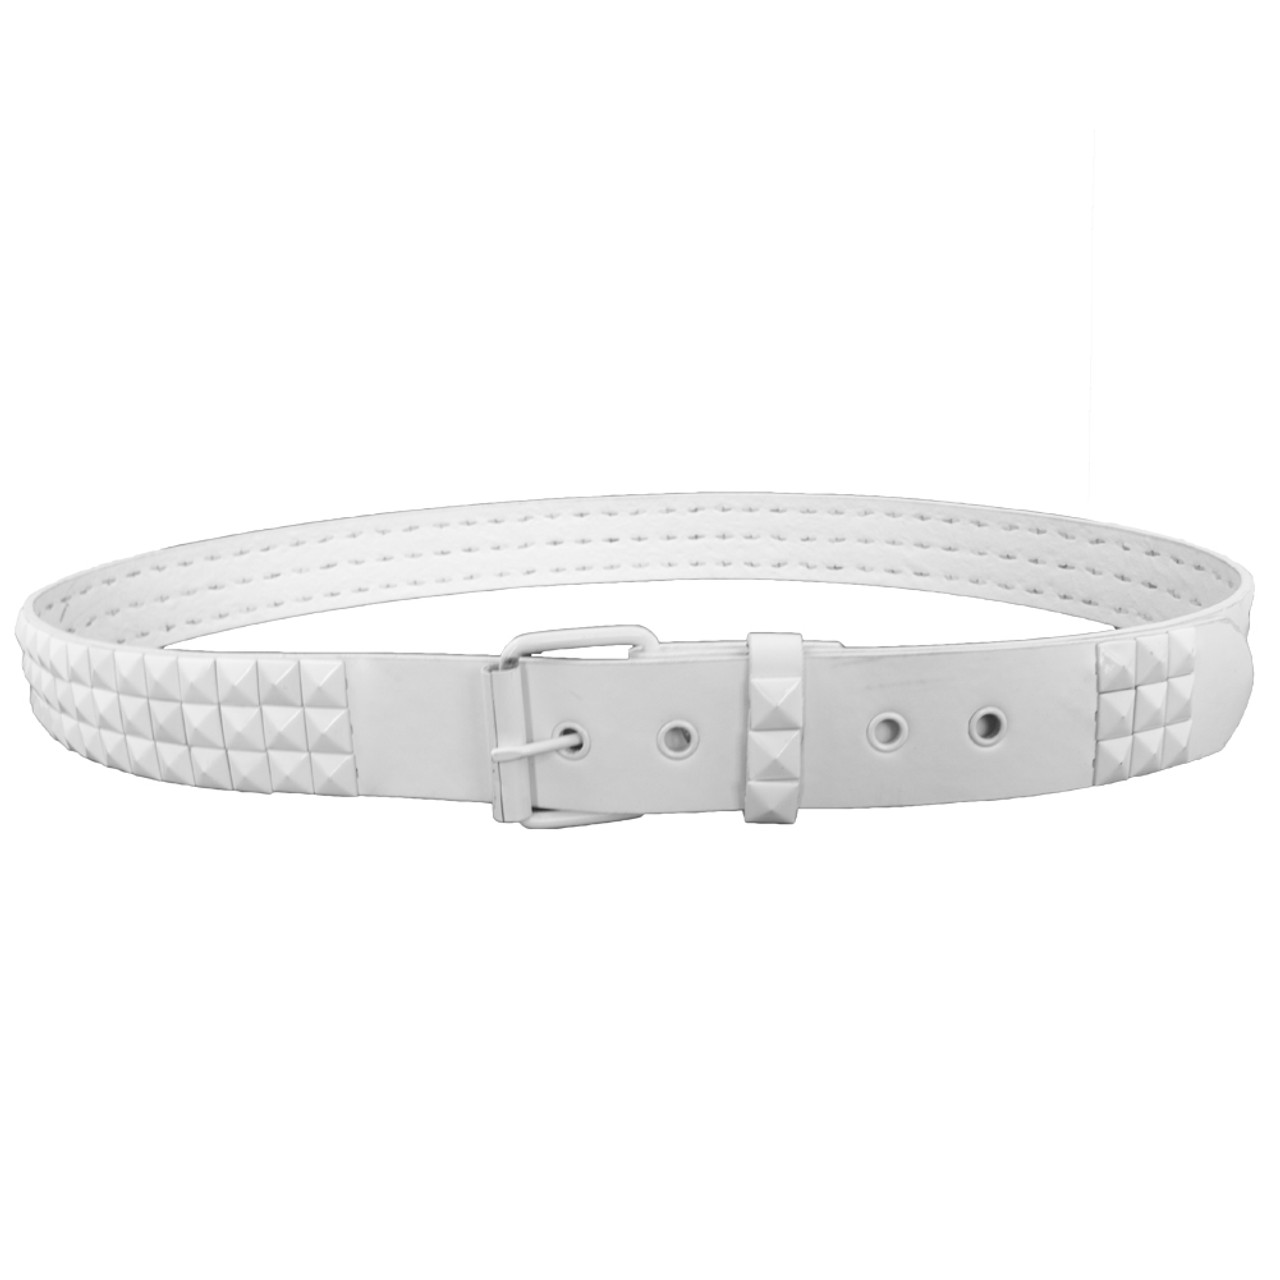 12 PACK White and Black Checkerboard Studded Belts - Black Mix Sizes ...